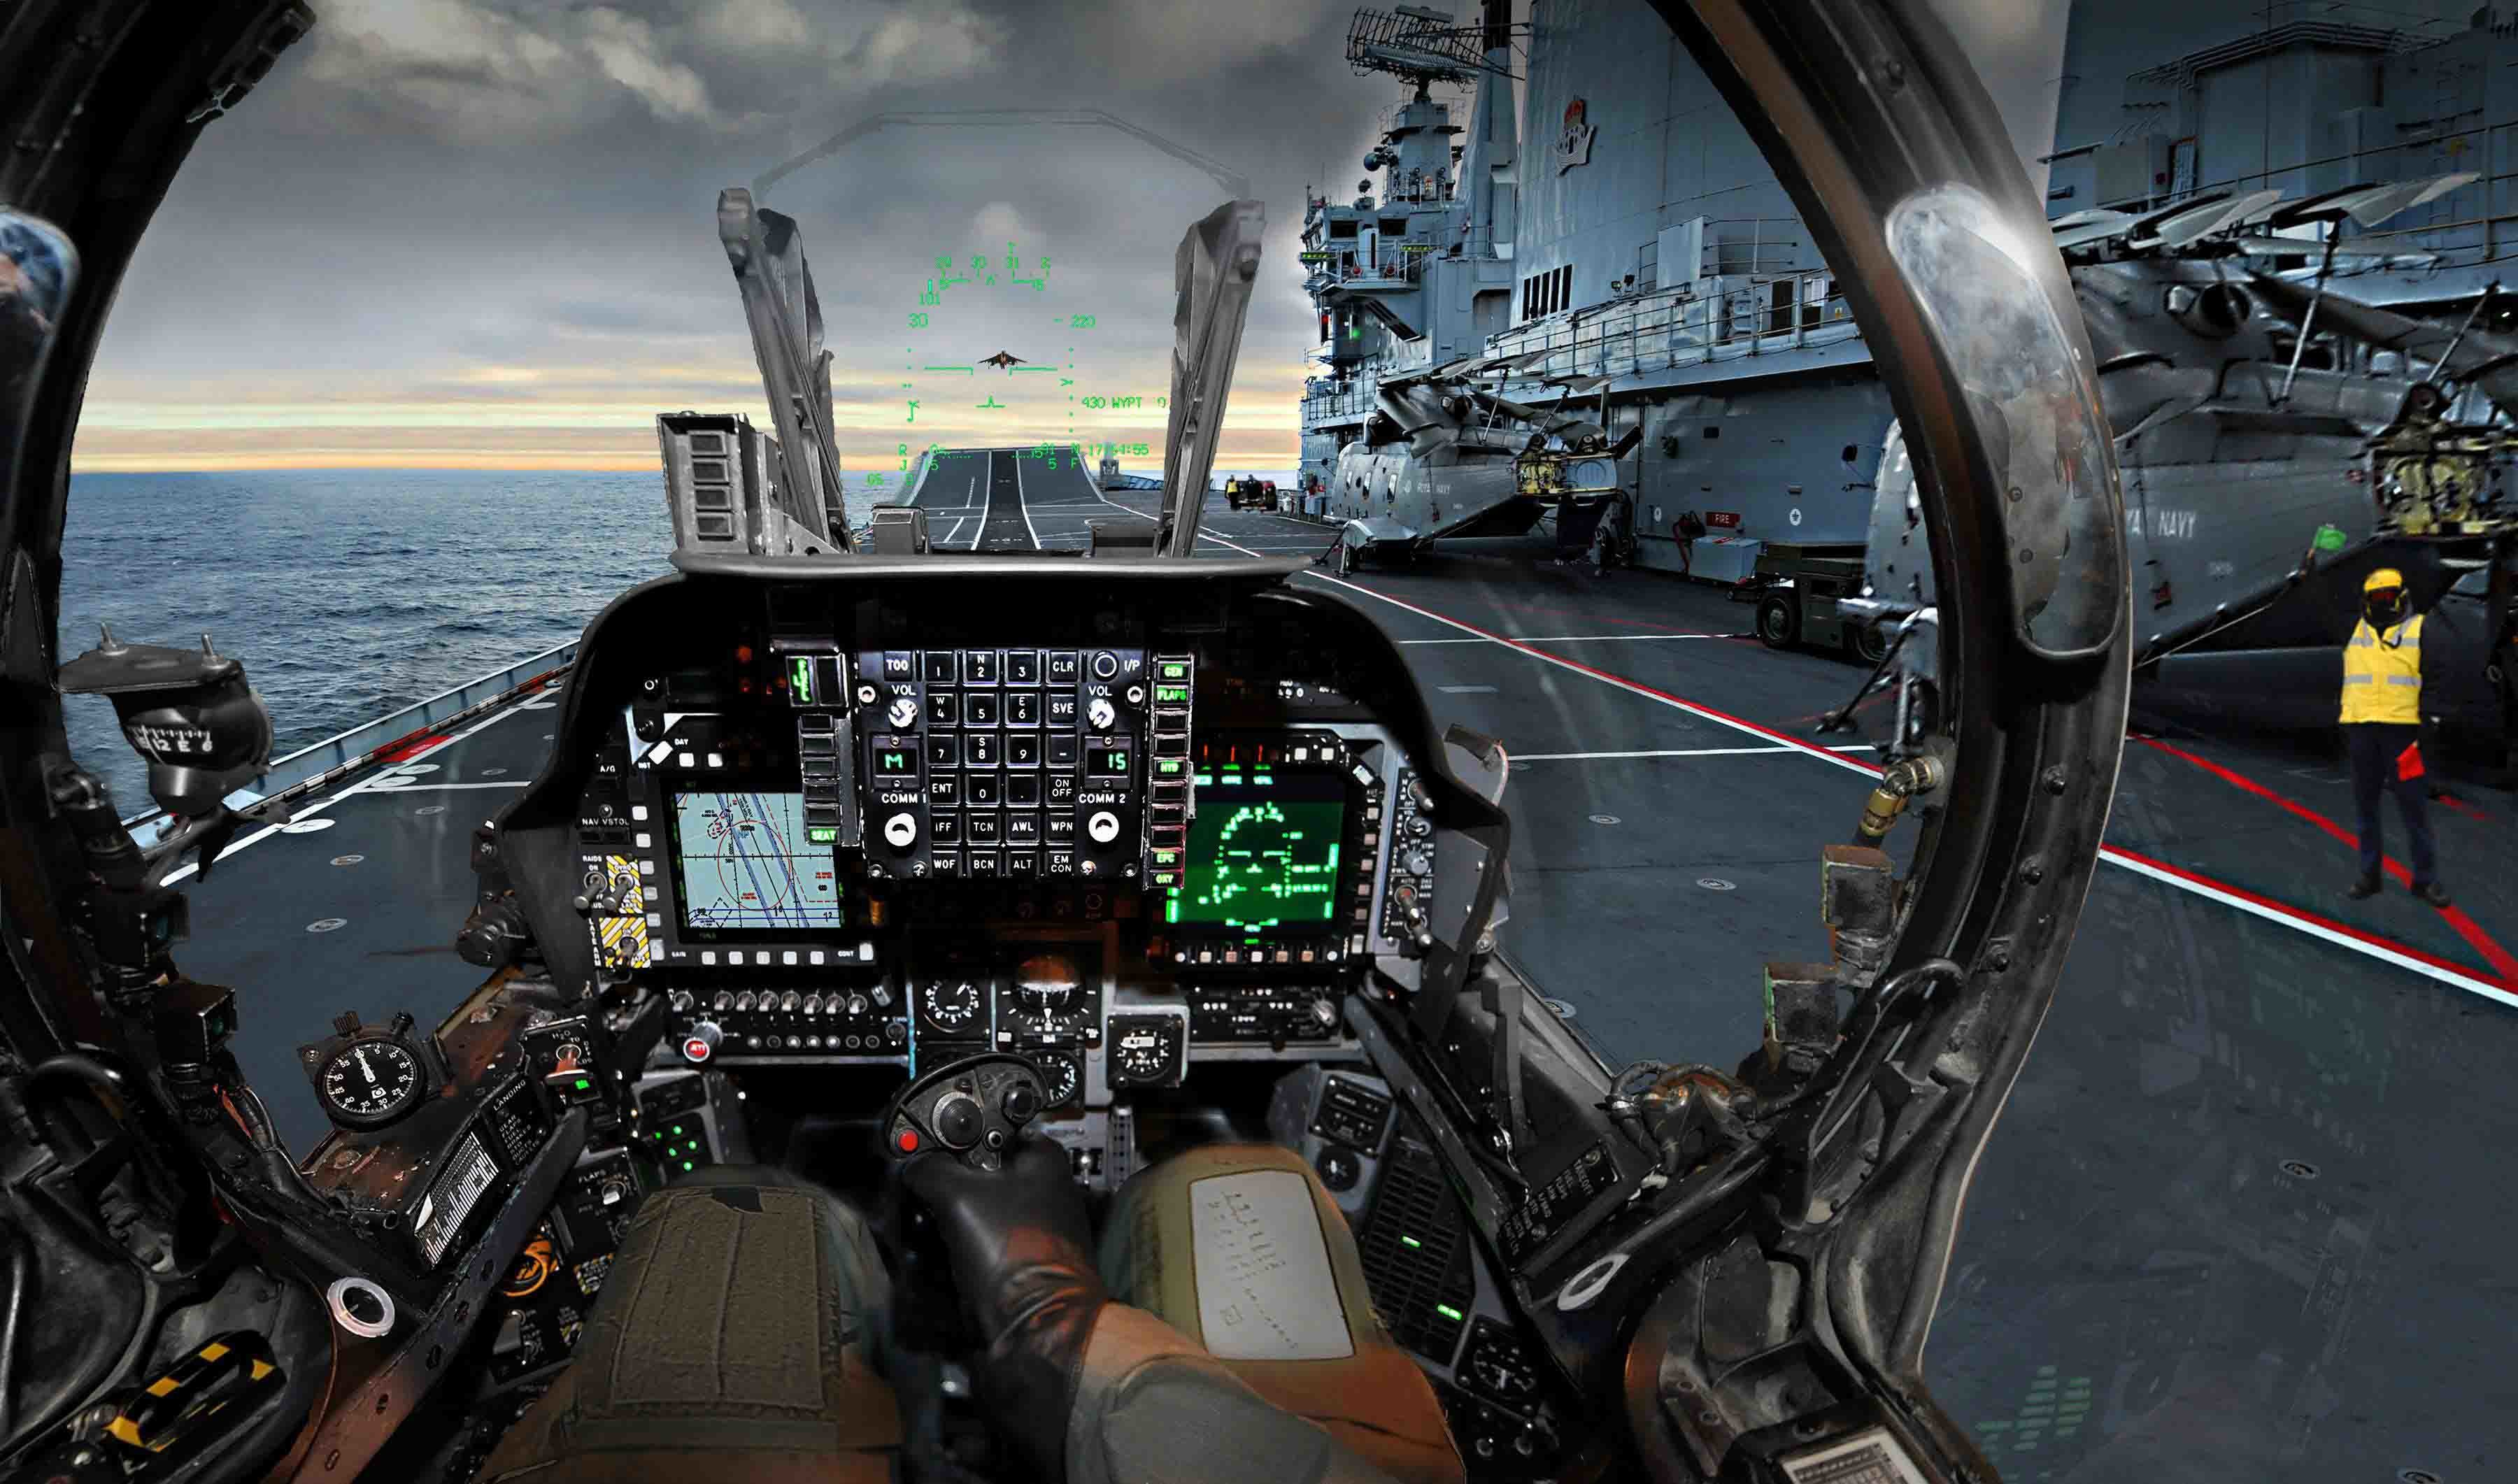 3600x2122 Fighter Aircraft Cockpit hd pic Fighter Aircraft Cockpit Hd wallpaper .